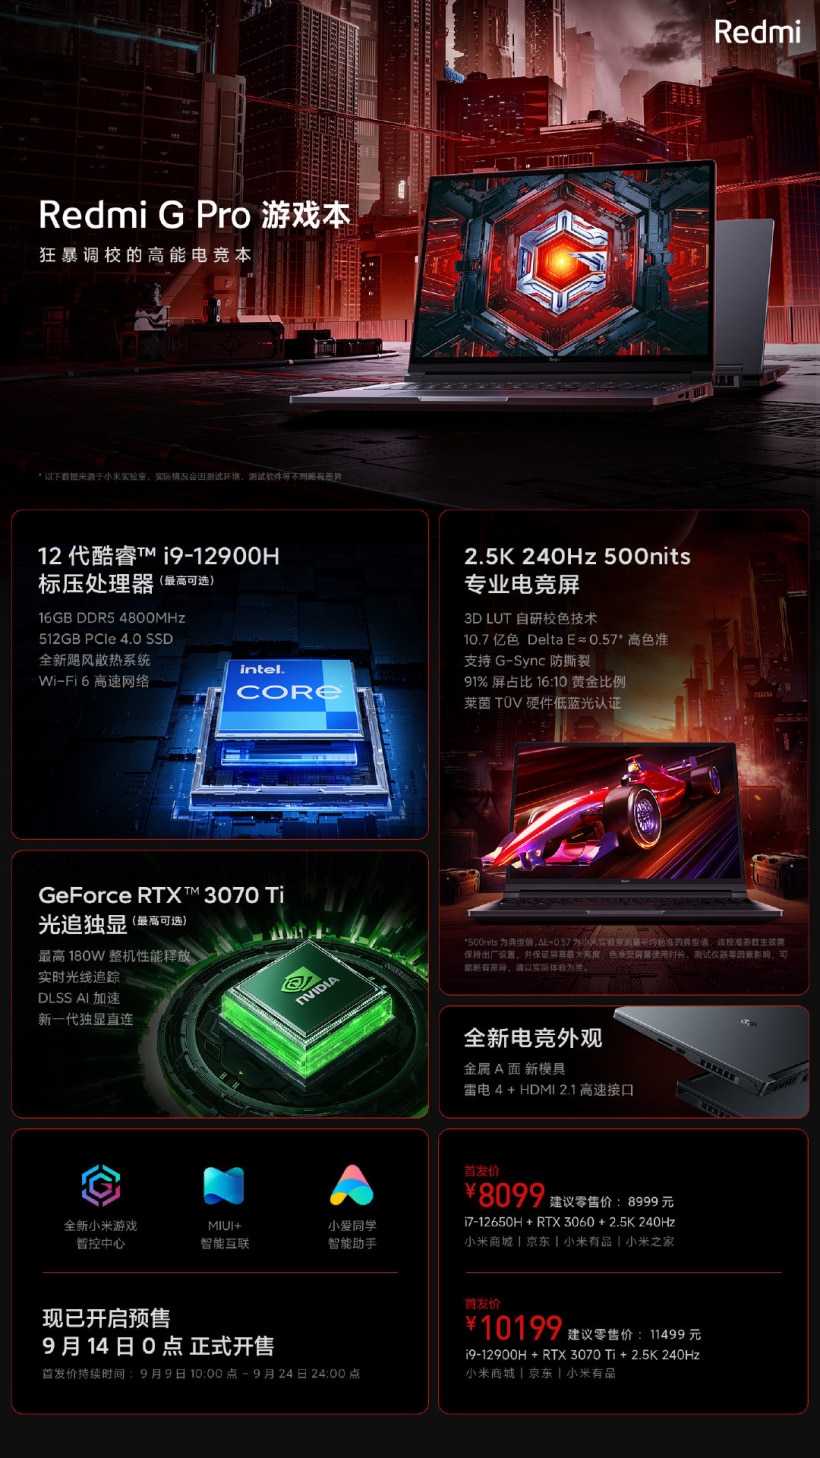 Redmi G Pro gaming notebook